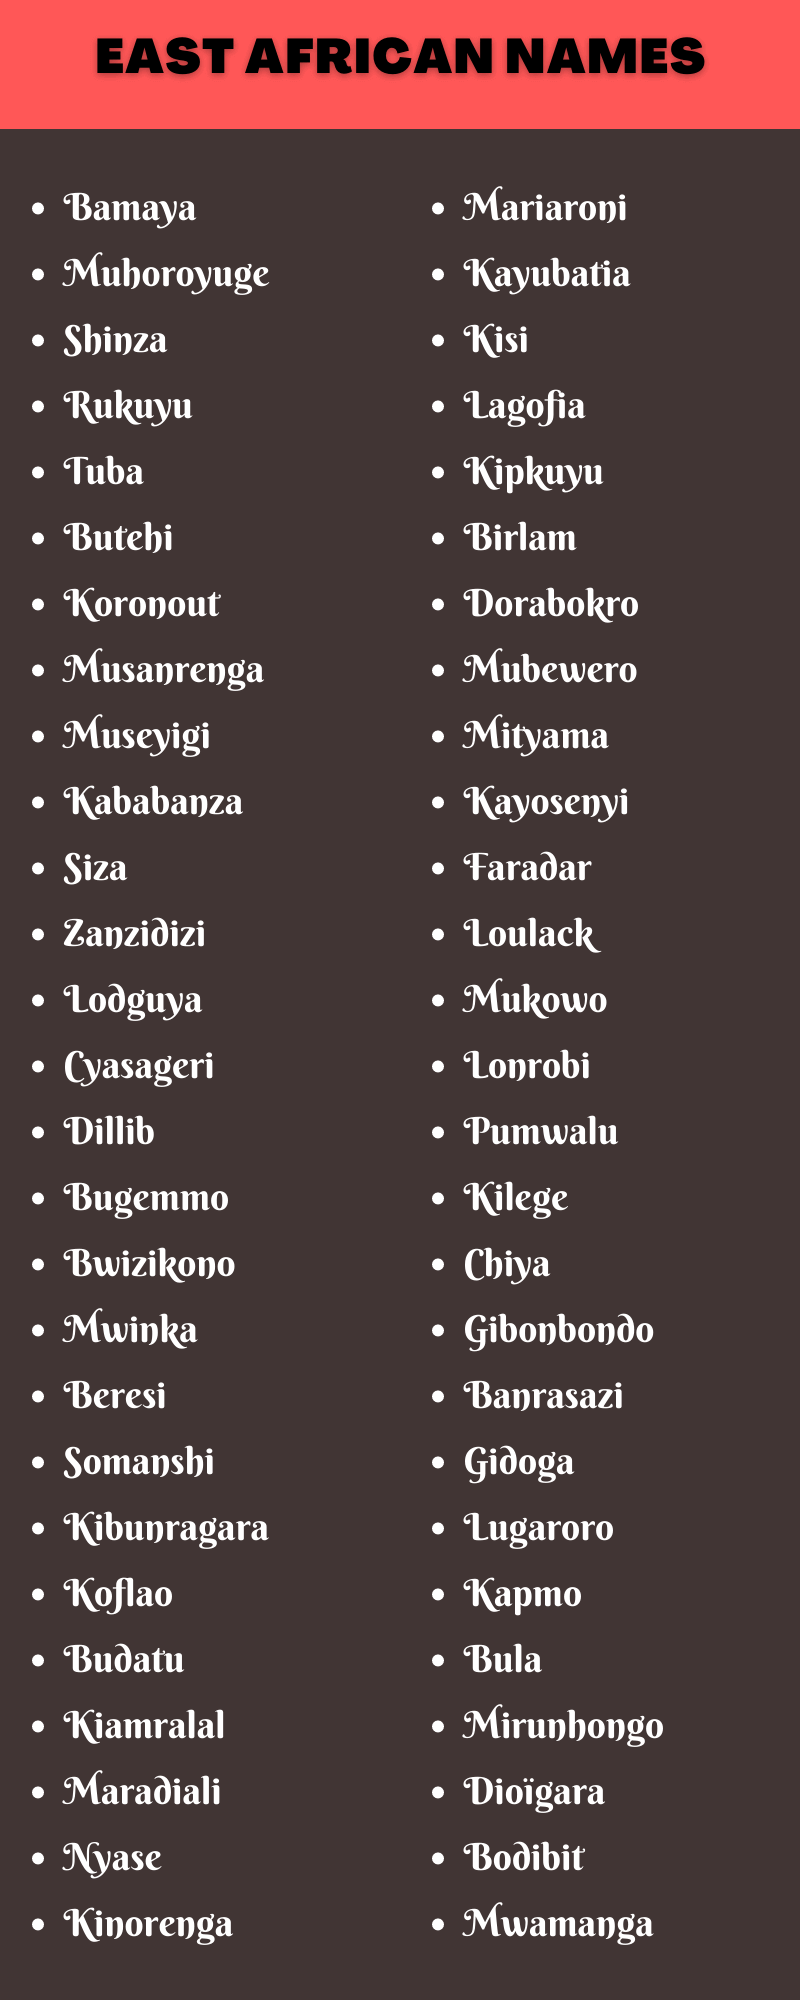 East African Names